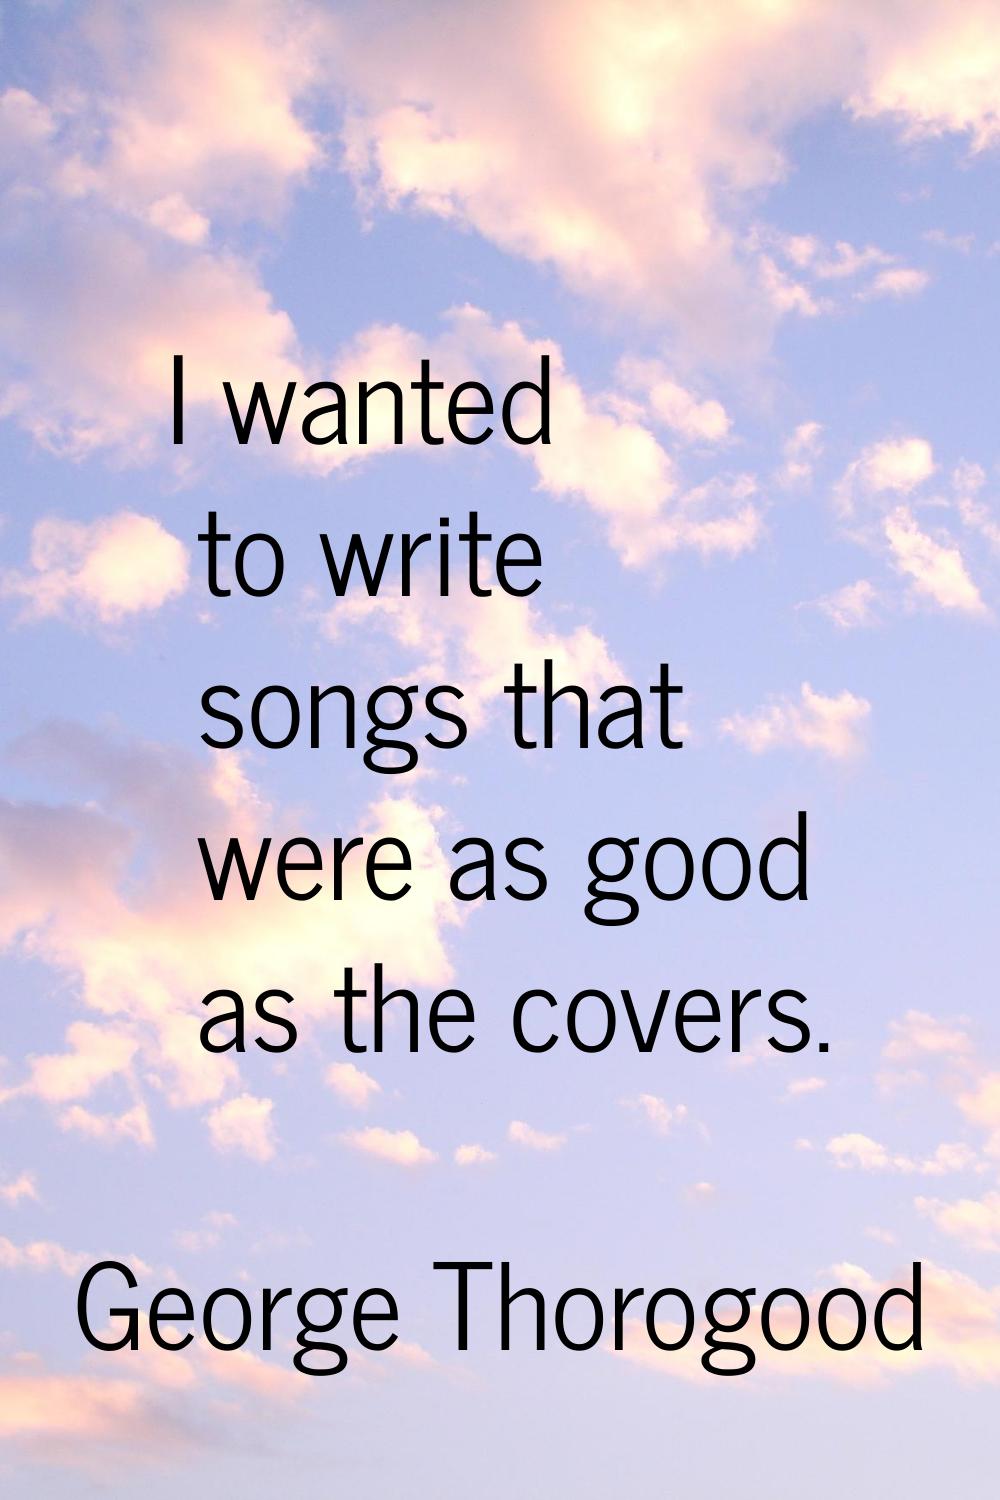 I wanted to write songs that were as good as the covers.